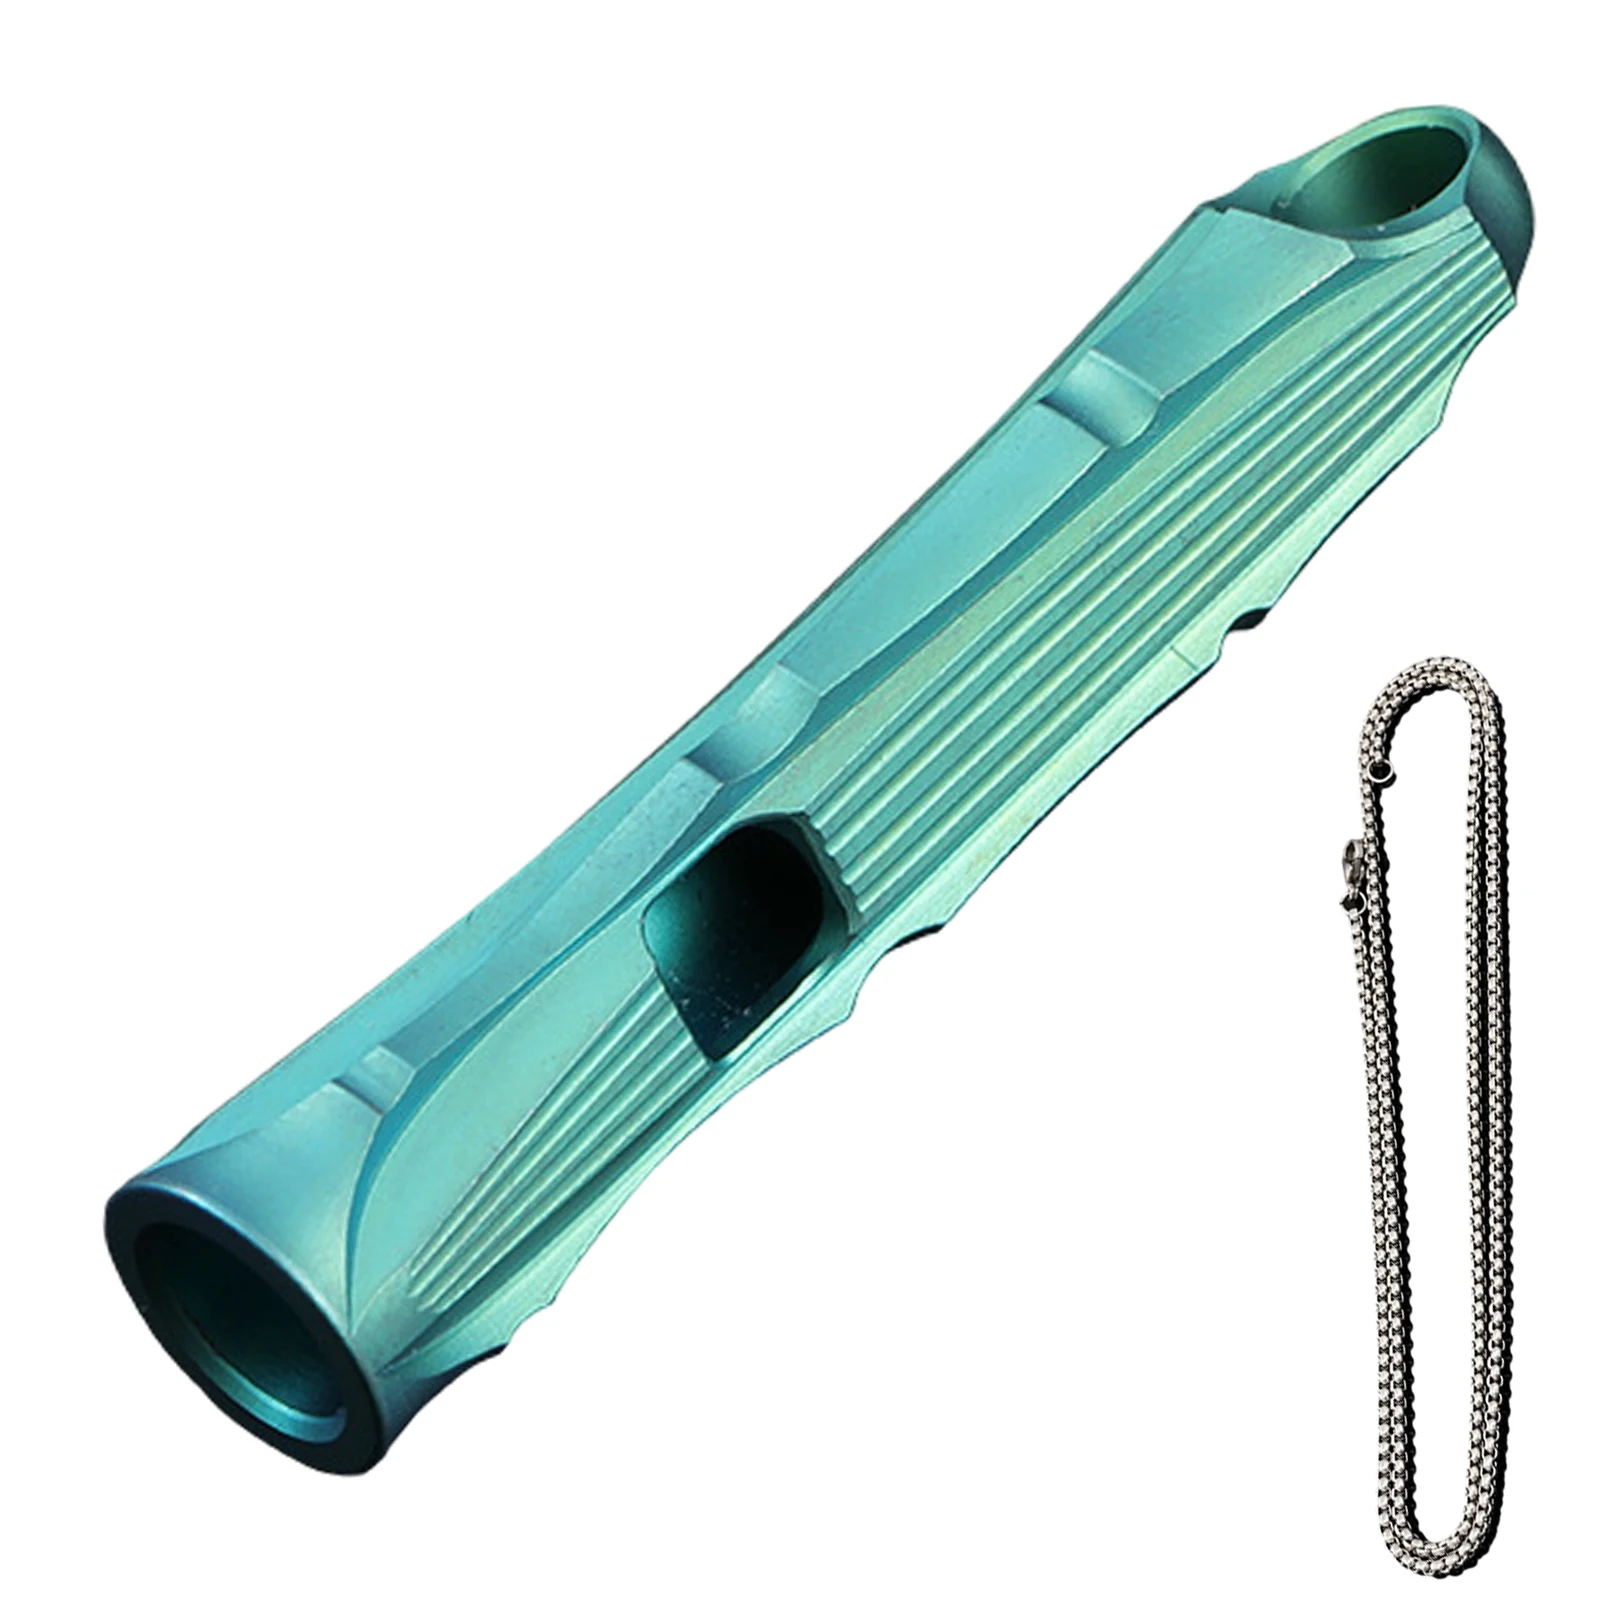 

Emergency Whistle Loud Survival Outdoor With Necklace Hiking Safety Lightweight Kids Boating Training Titanium Alloy Portable